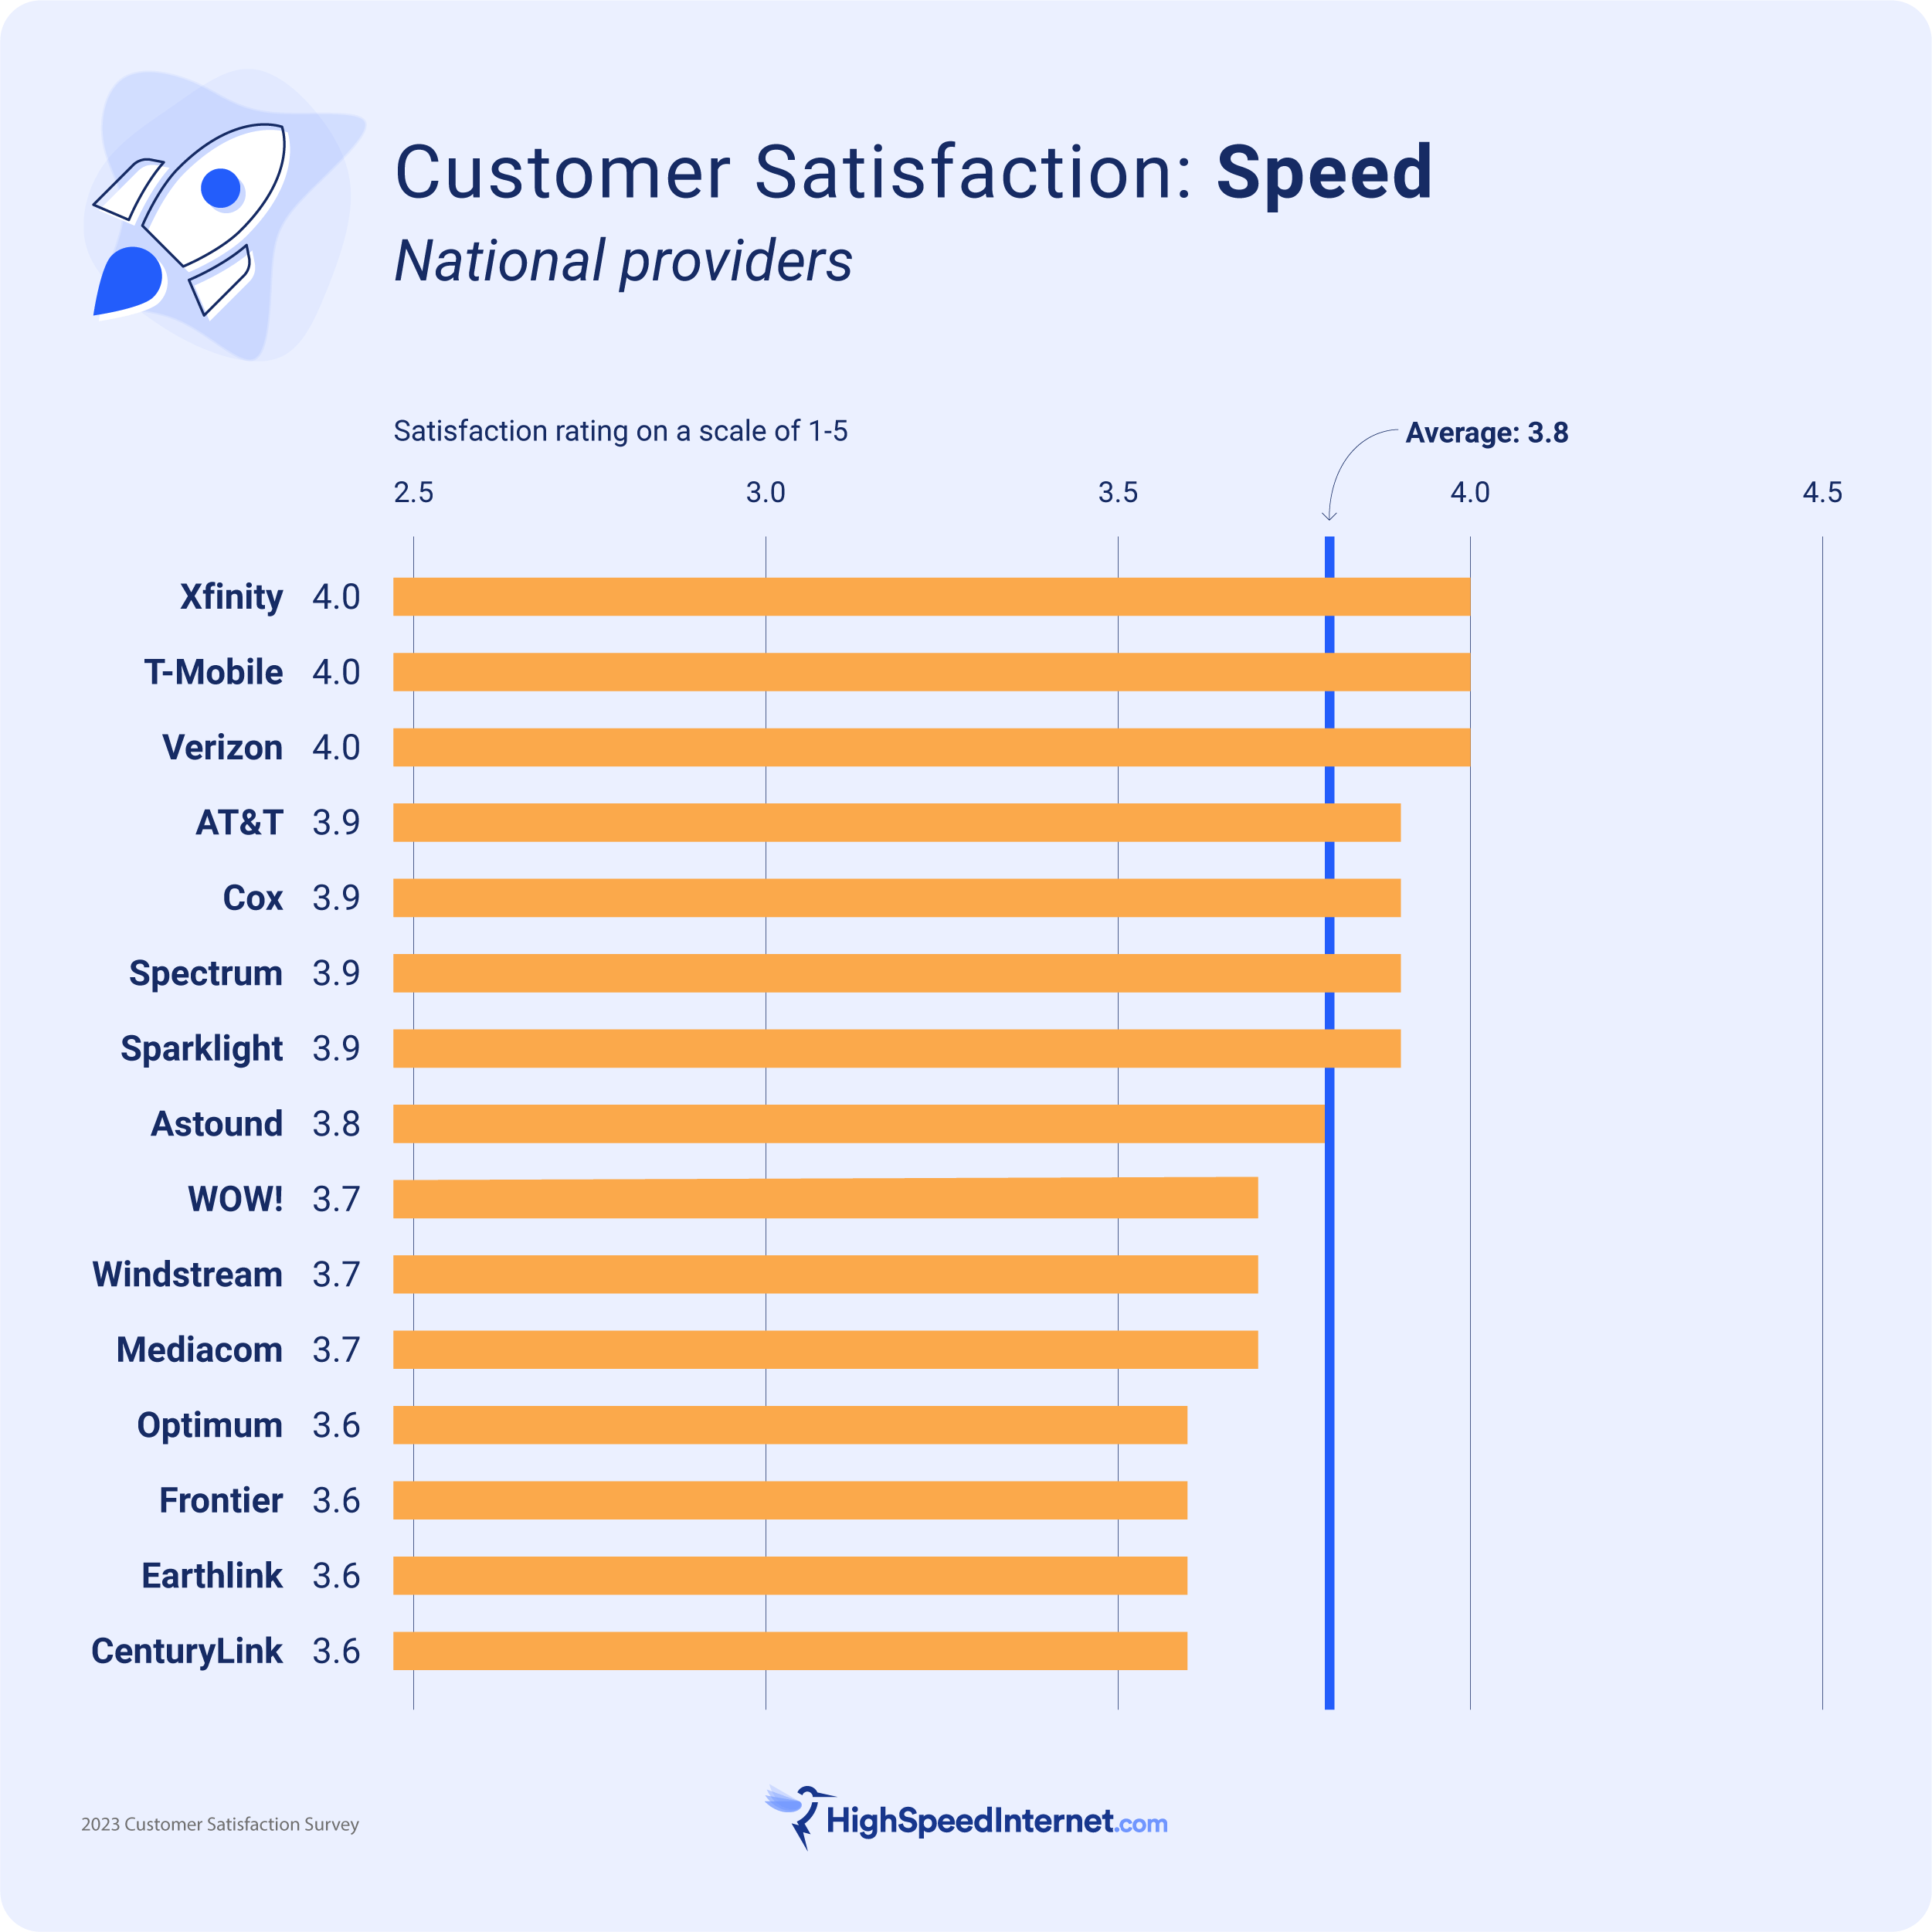 Top providers for speed are Xfinity, T-Mobile, and Verizon